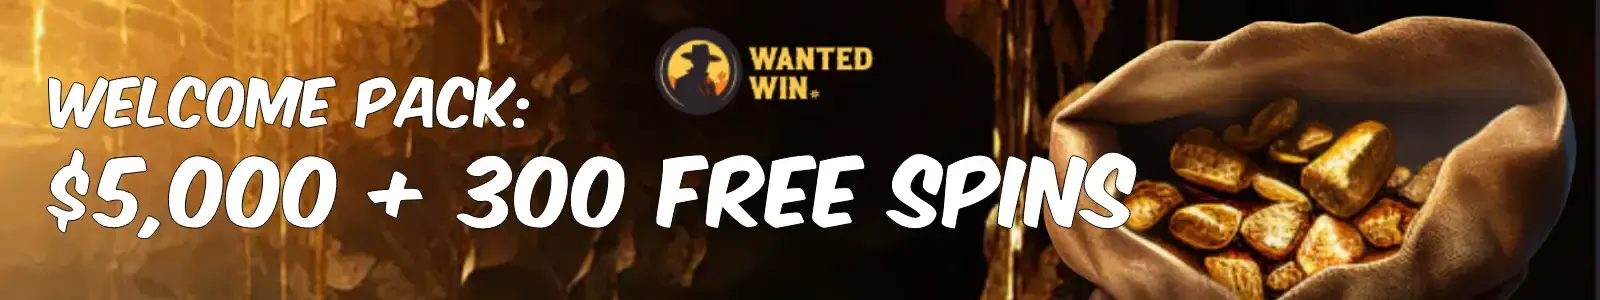 Wanted Win Casino Welcome Pack